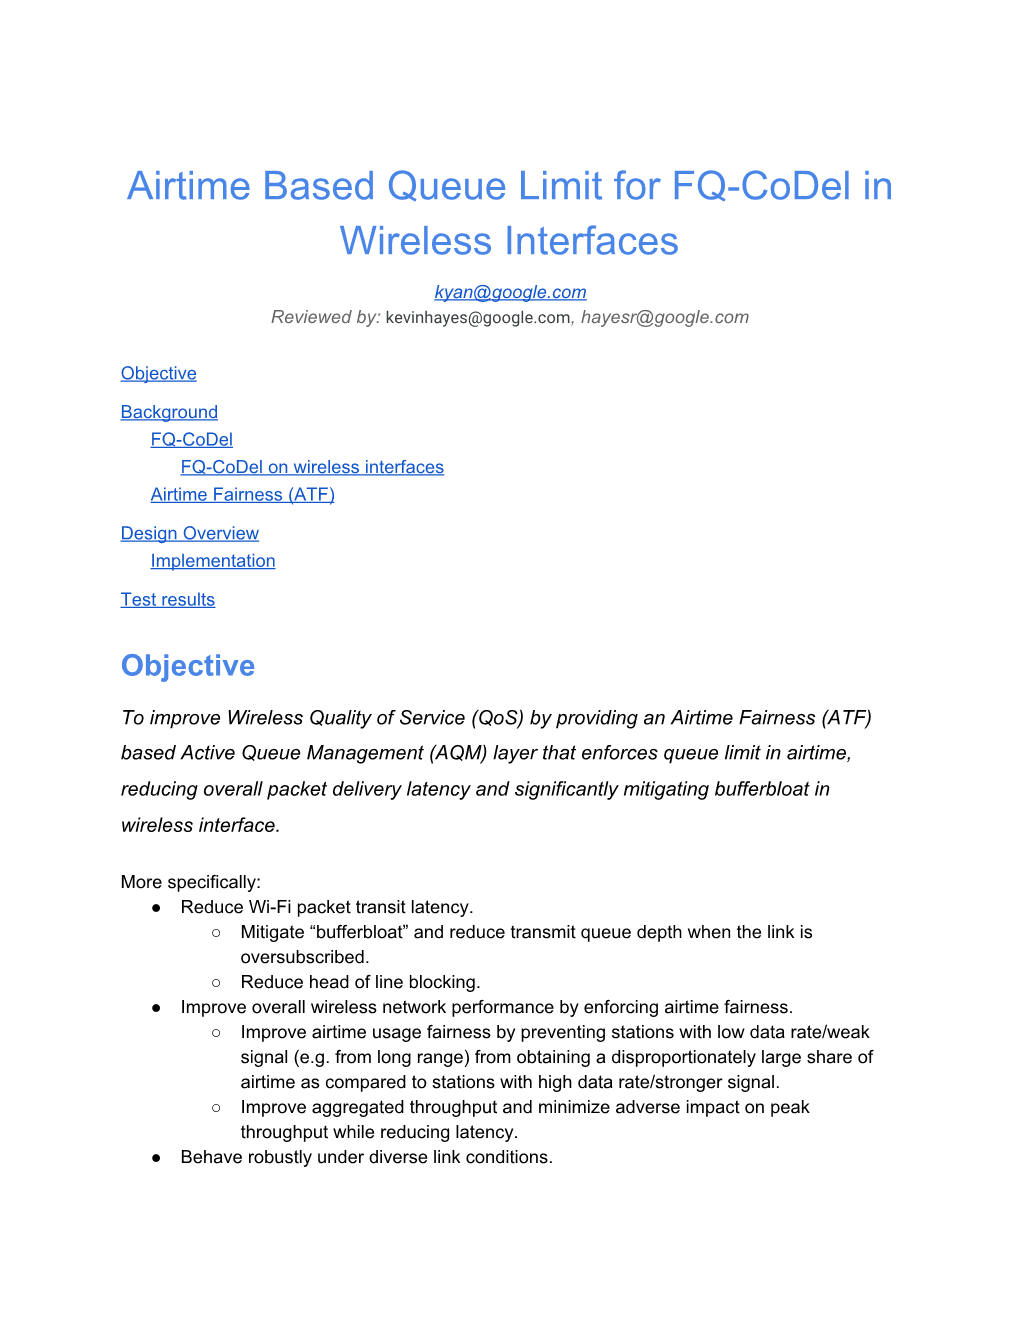 Airtime Based Queue Limit for FQ-Codel in Wireless Interfaces